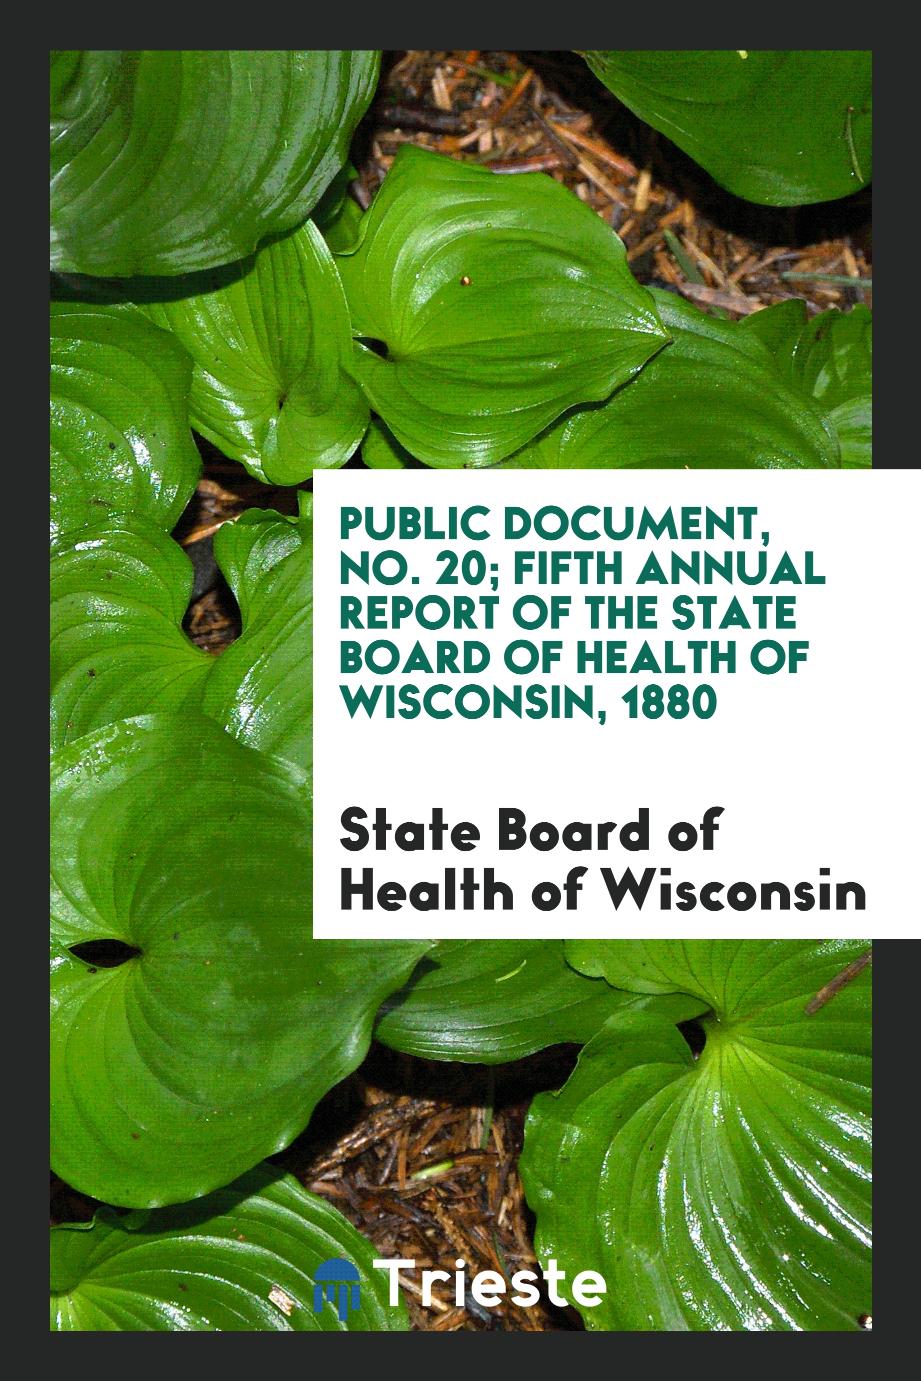 Public Document, No. 20; Fifth Annual Report of the State Board of Health of Wisconsin, 1880